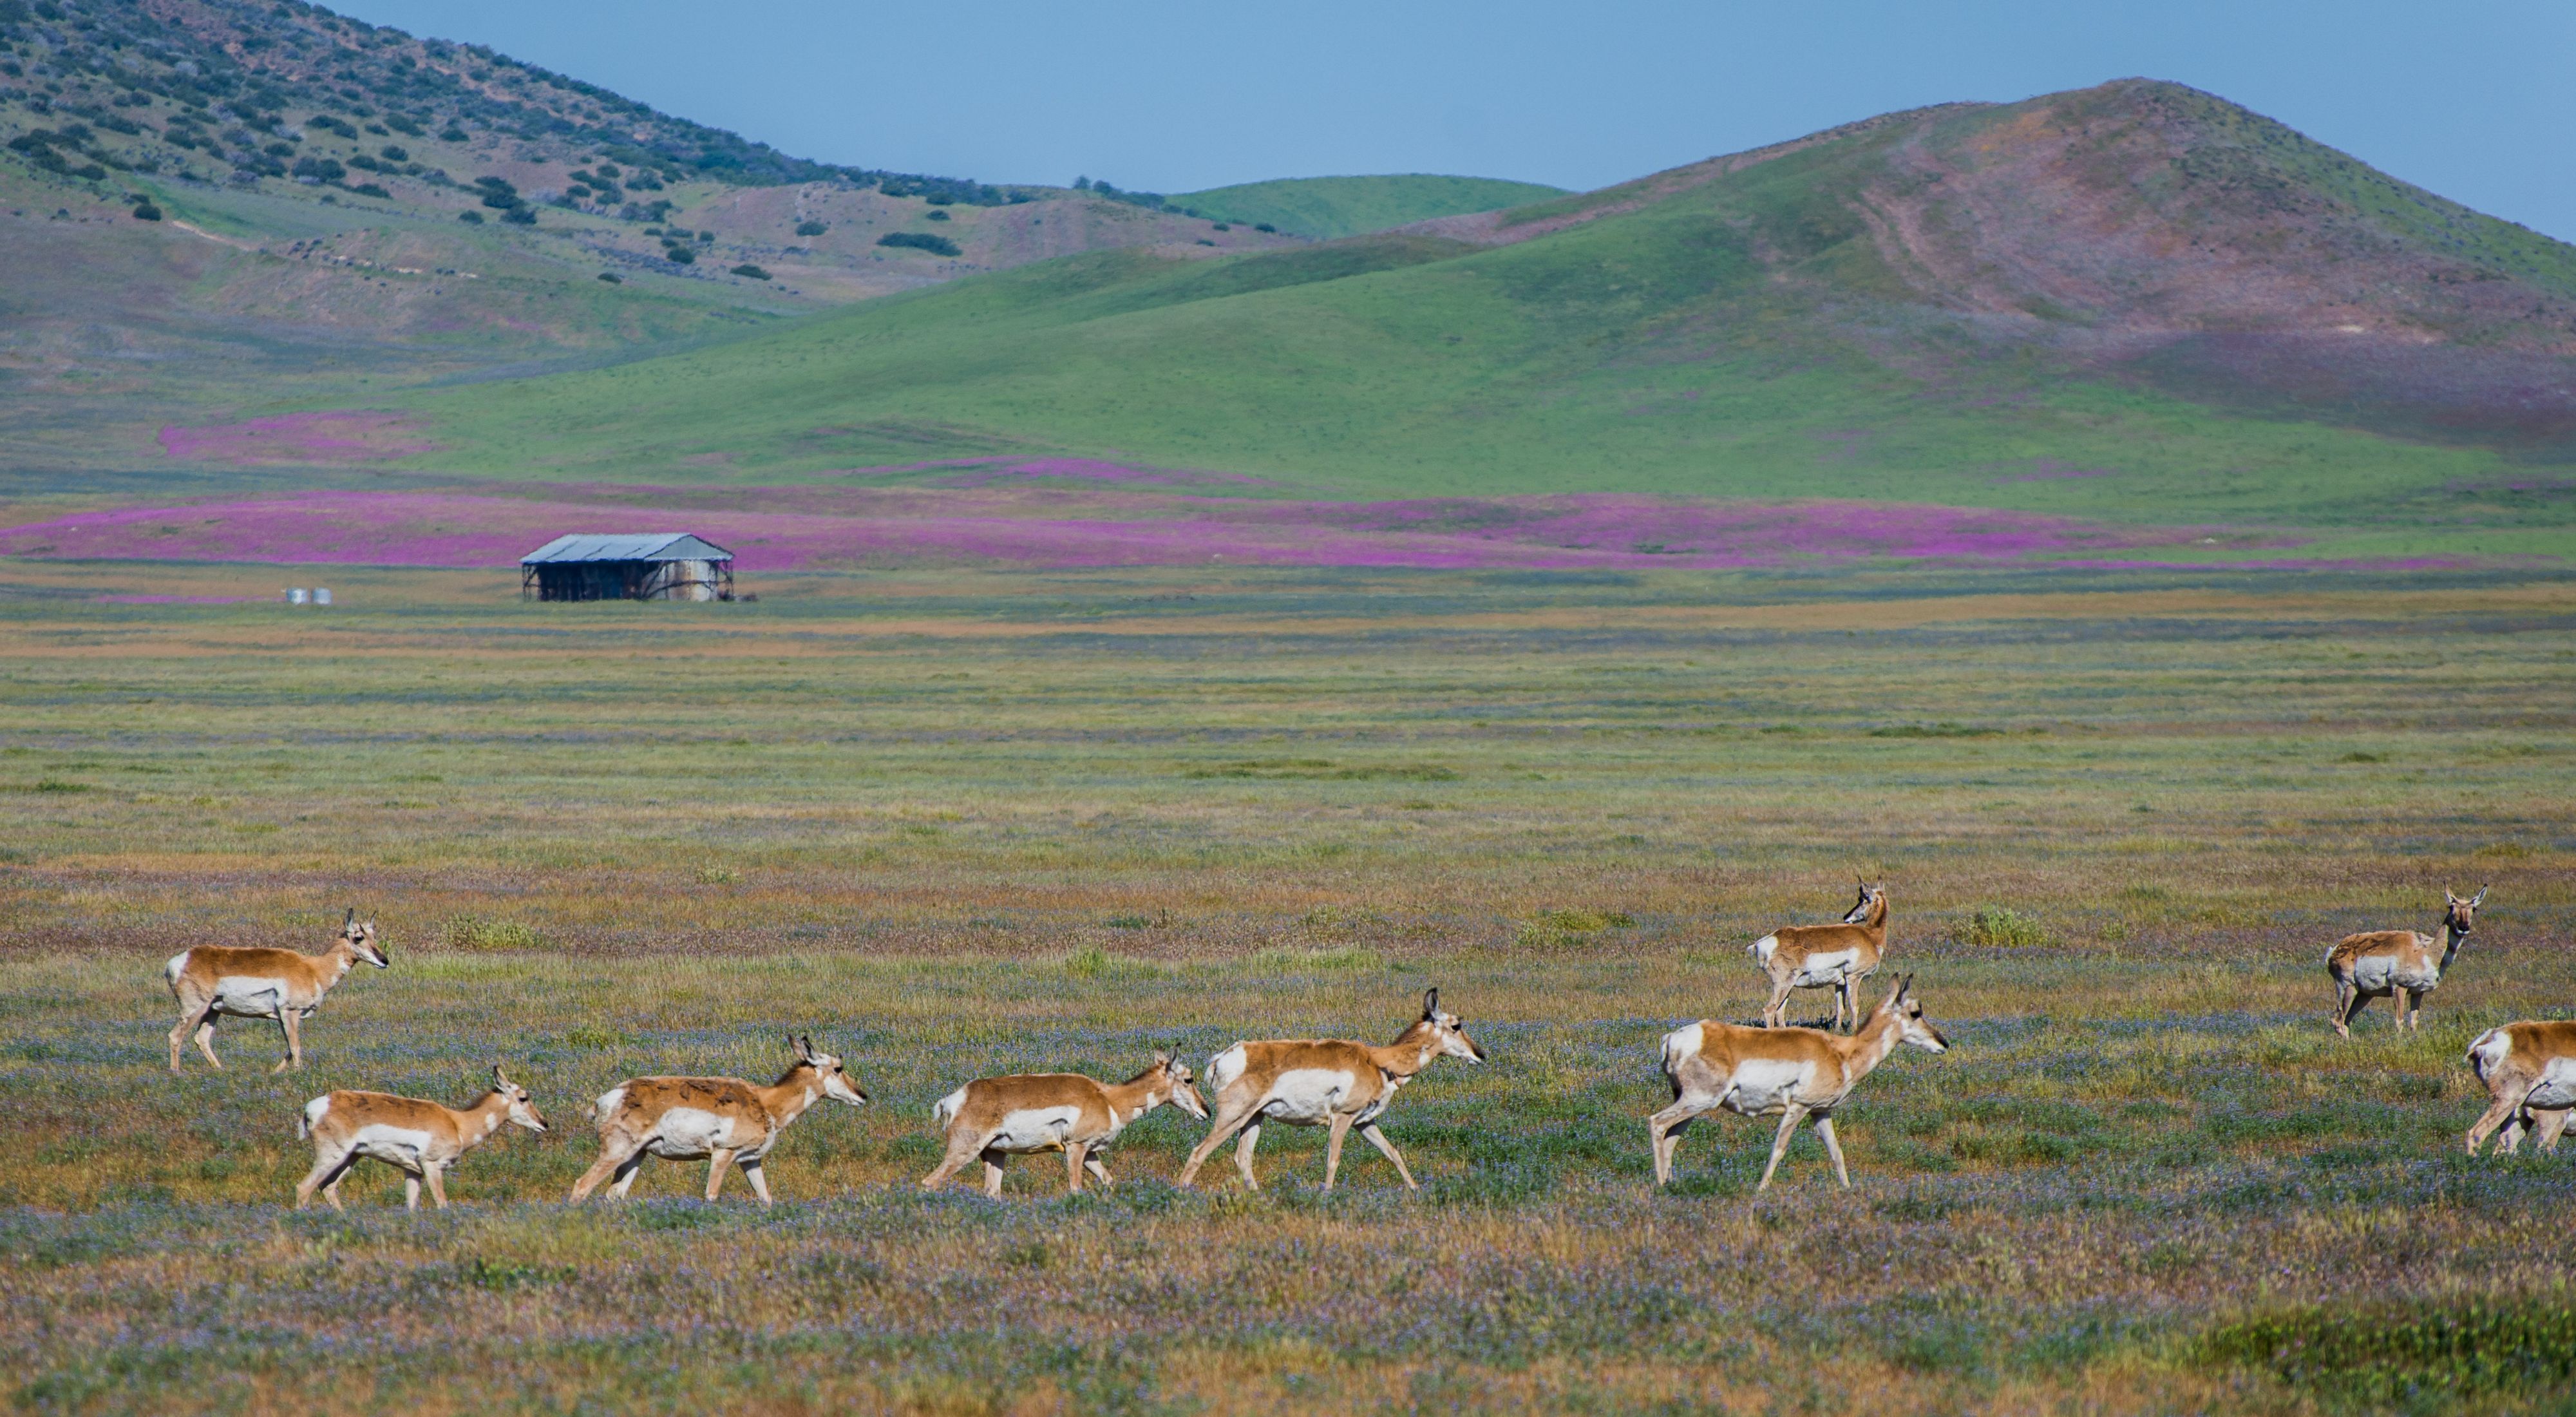 A herd of pronghorn antelope cross a grassland with purple flowers.  